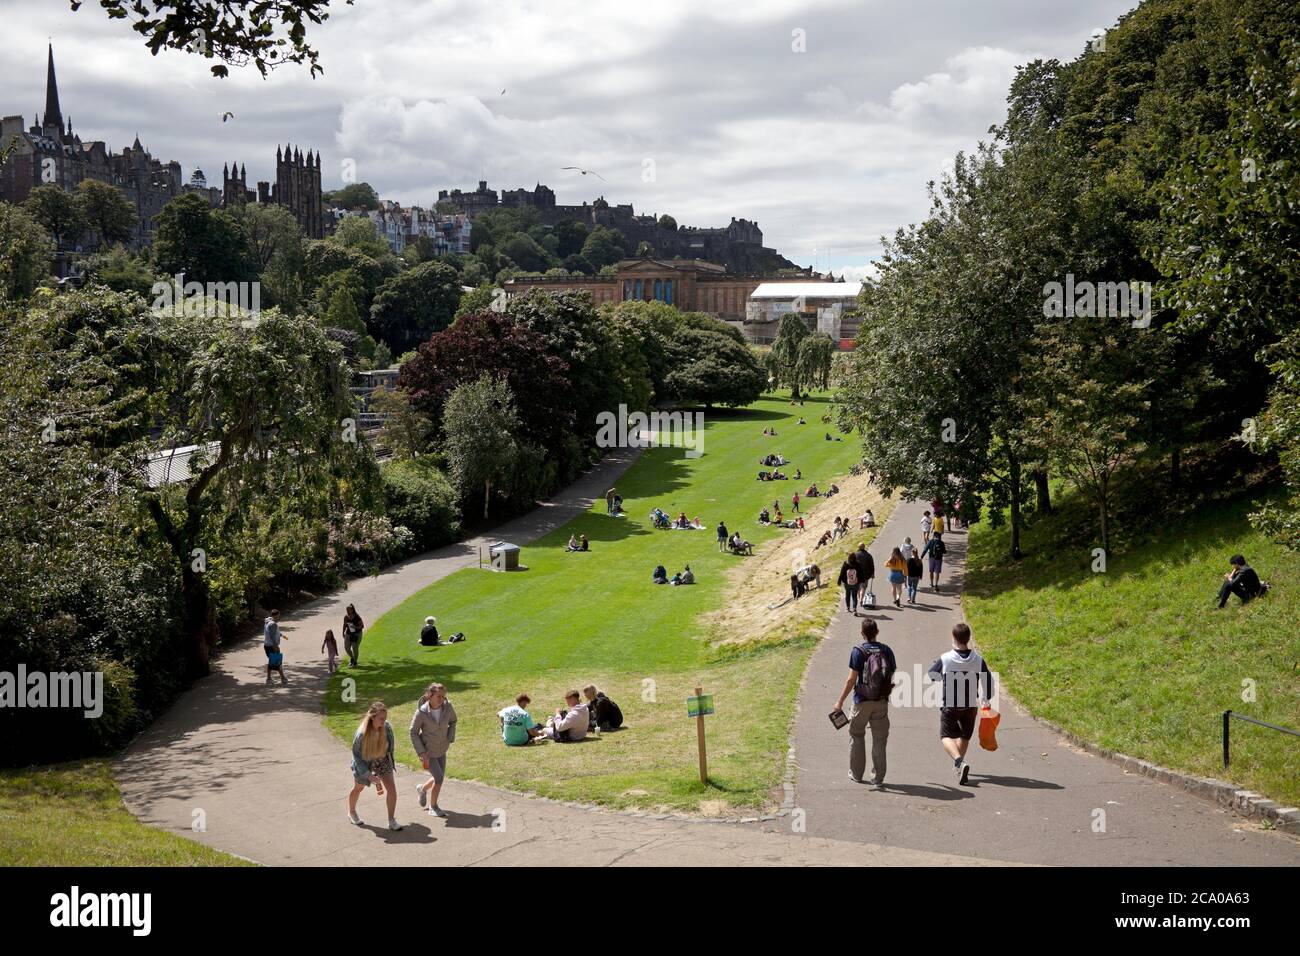 Edinburgh, Scotland, UK. 3 August 2020. Looking a wee bit more normal on the cities streets with some tourists wandering the pavements looking at landmarks and visitingPrinces Street Gardens. Concerns are growing over the potential of widespread job losses in Edinburgh tourism industry  two-thirds of the city’s hotels rooms may be left lying empty this month.No festivals, a slump in overseas visitors, the closure of attractions and a reluctance by UK holidaymakers to book city breaks perhaps “the worst month ever for tourism. Credit: Arch White/ Alamy Live News. Stock Photo